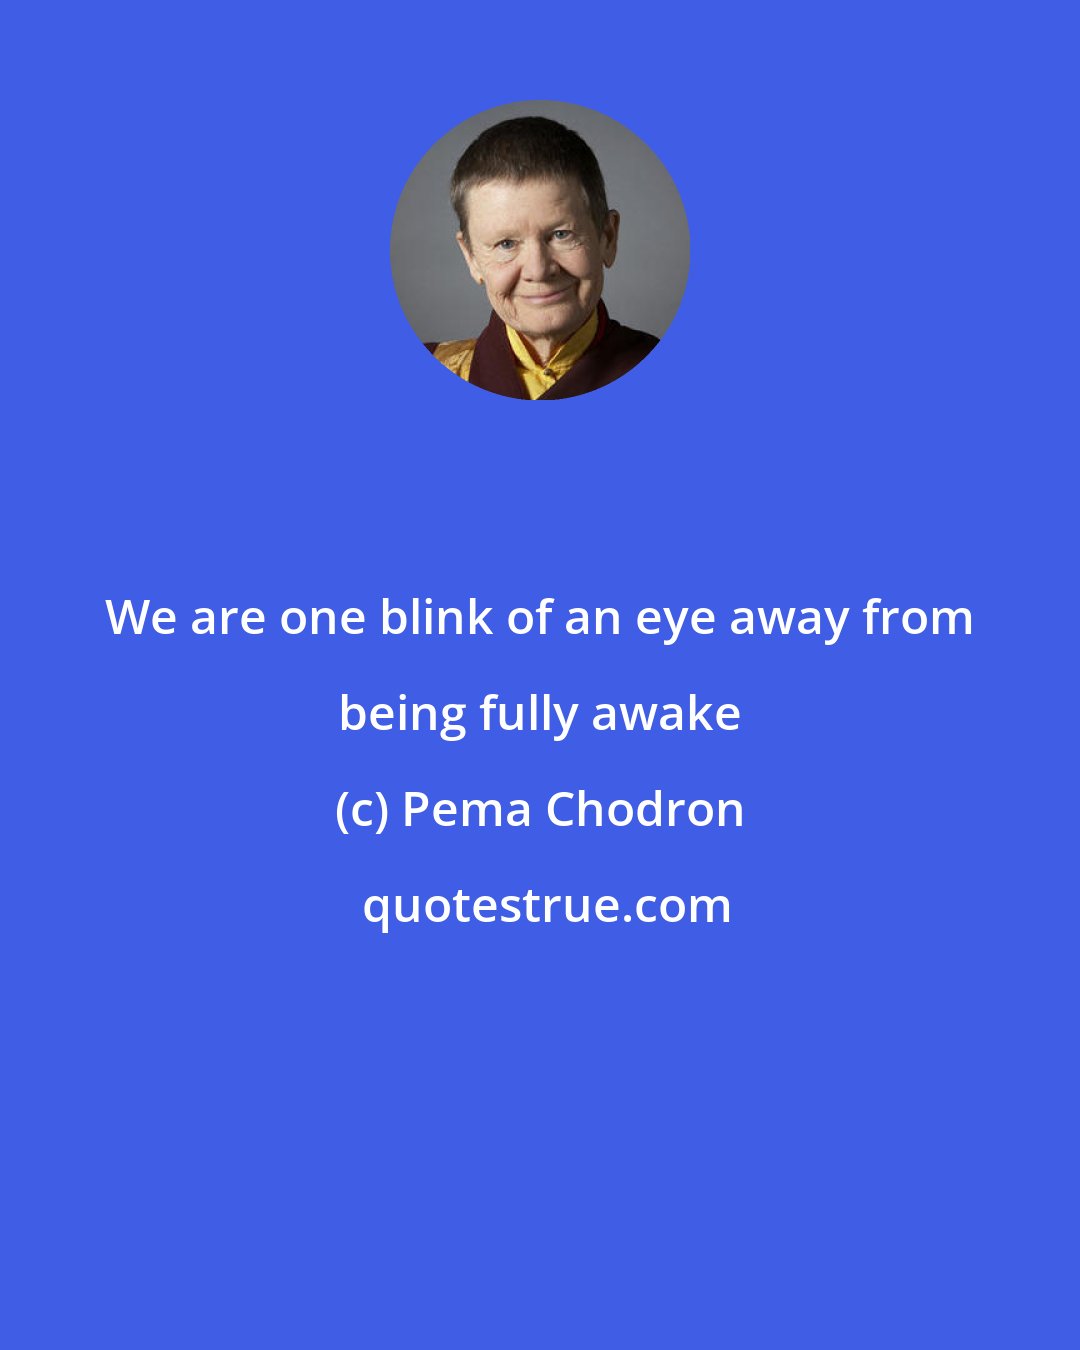 Pema Chodron: We are one blink of an eye away from being fully awake